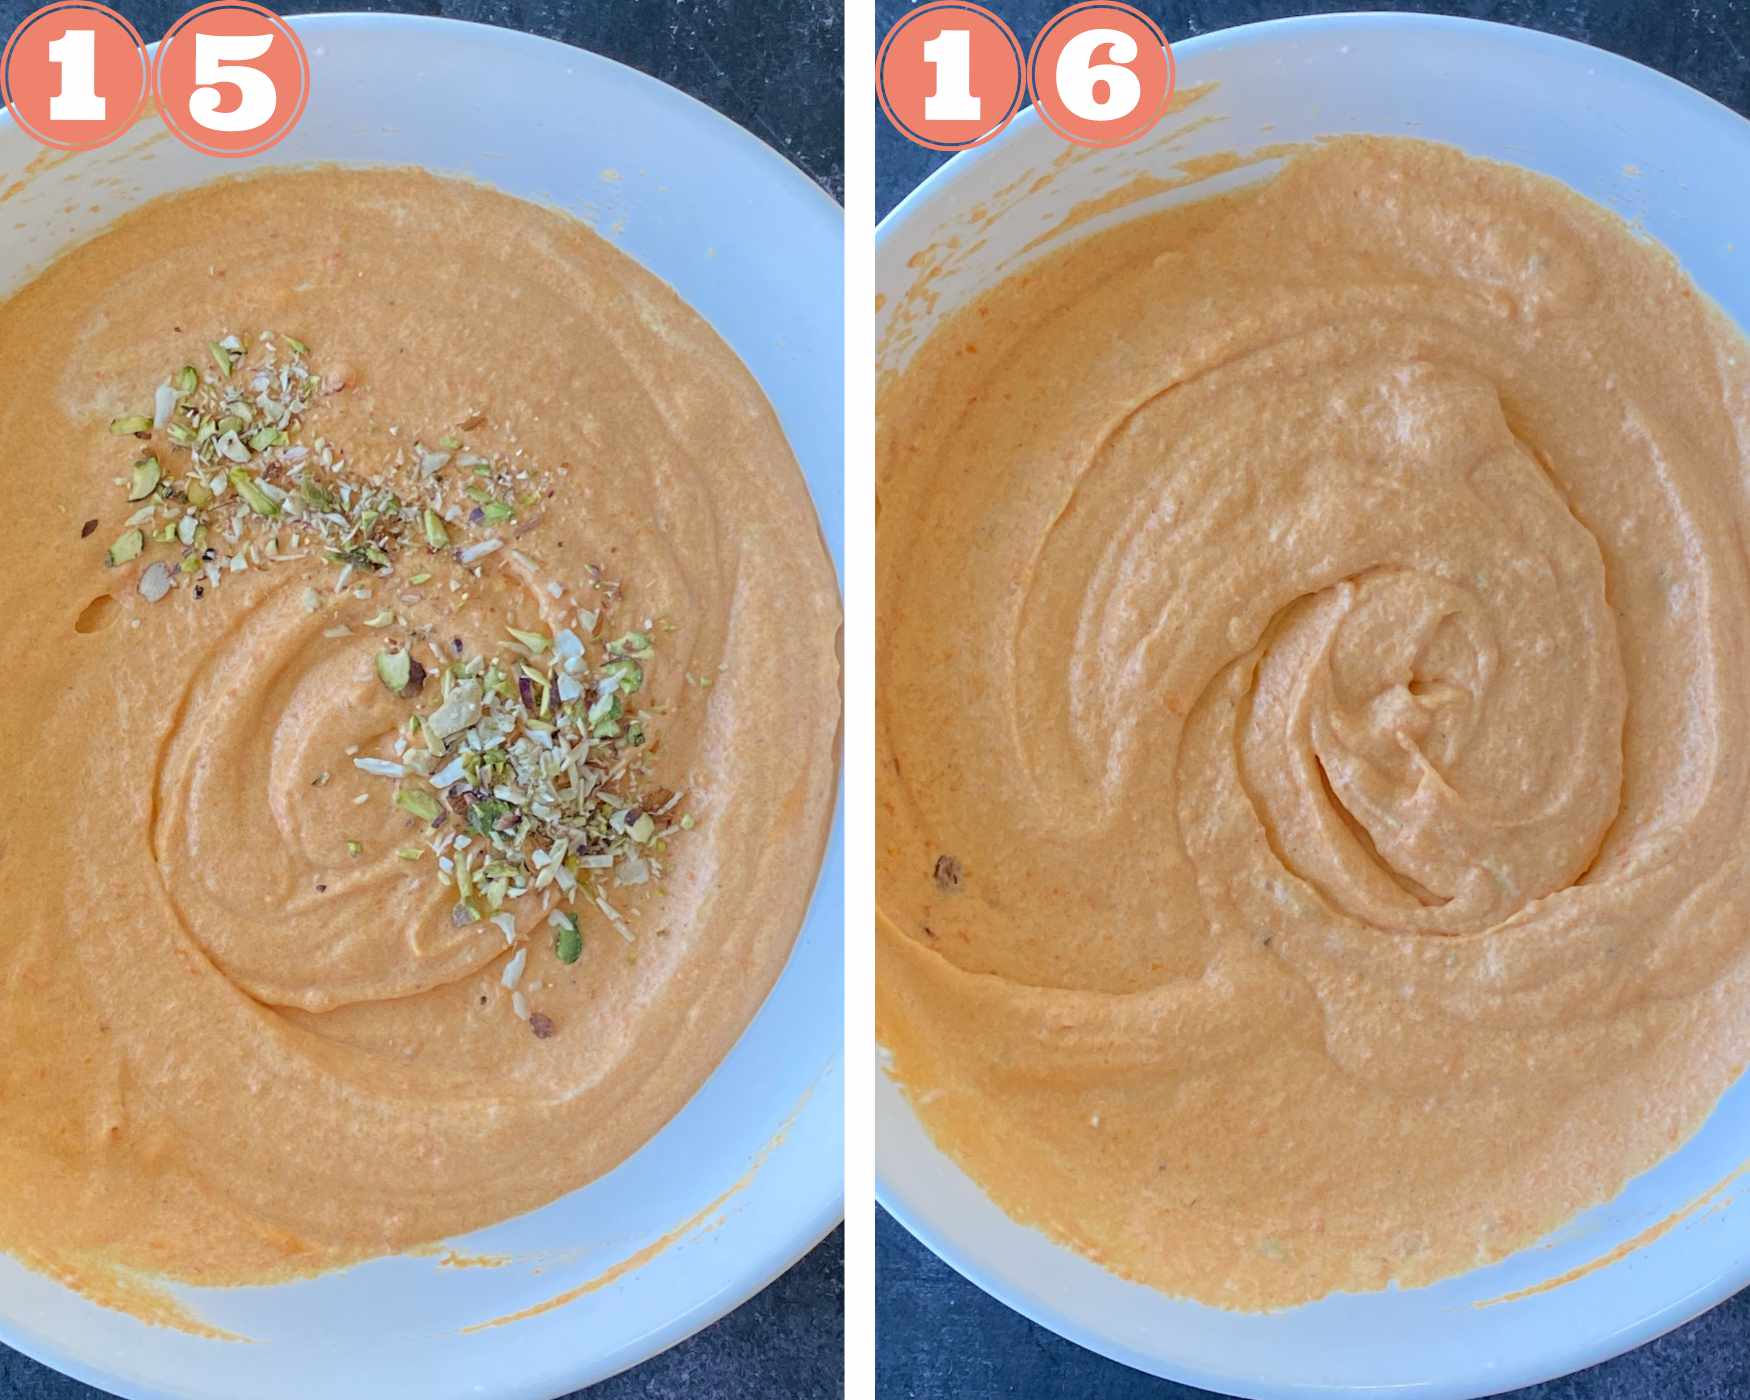 Add nuts and fold them into the carrot mixture.